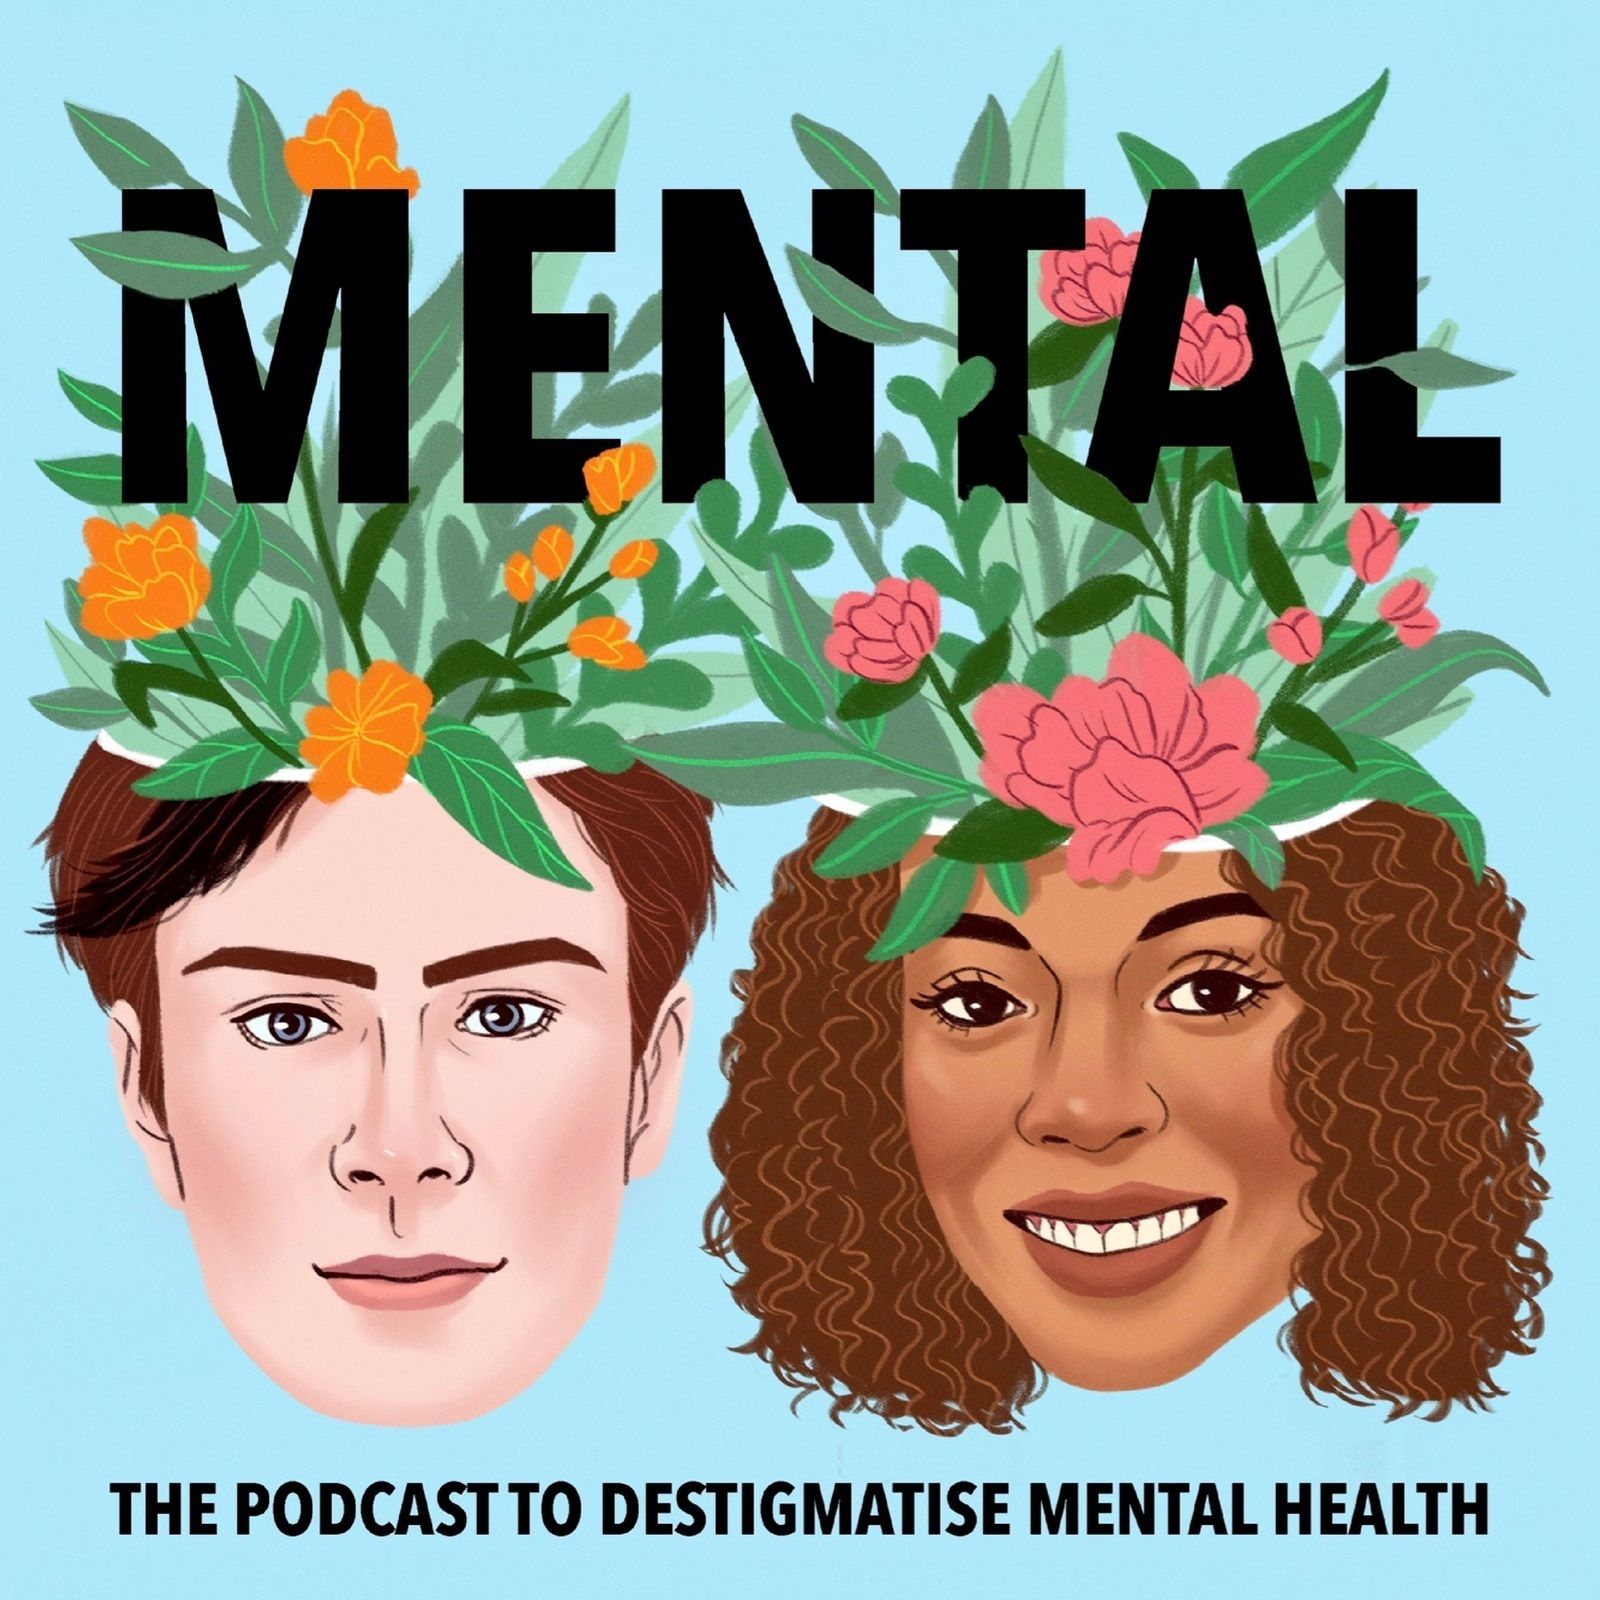 Mental - The Podcast to Destigmatise Mental Health - 274: Value 💐 What if we start with the idea that every person is doing their best in this moment with Dr Joe (Encore)